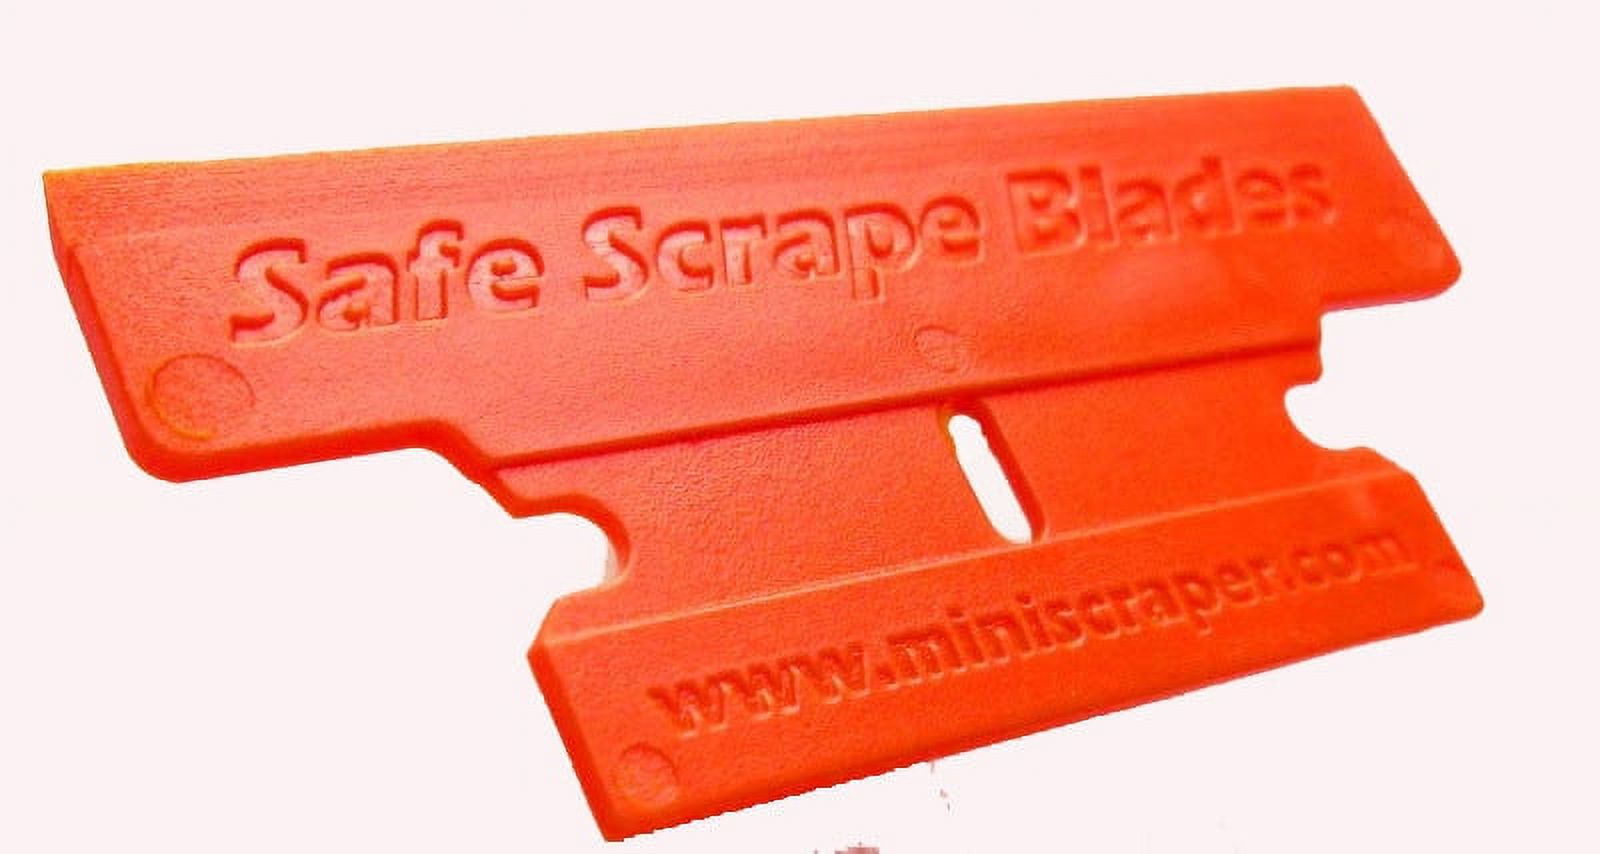 Heavy Duty Plastic Razor Blade Set with Scraper for Stickers Decals Paint Labels Scraper Removal Tool - image 4 of 5